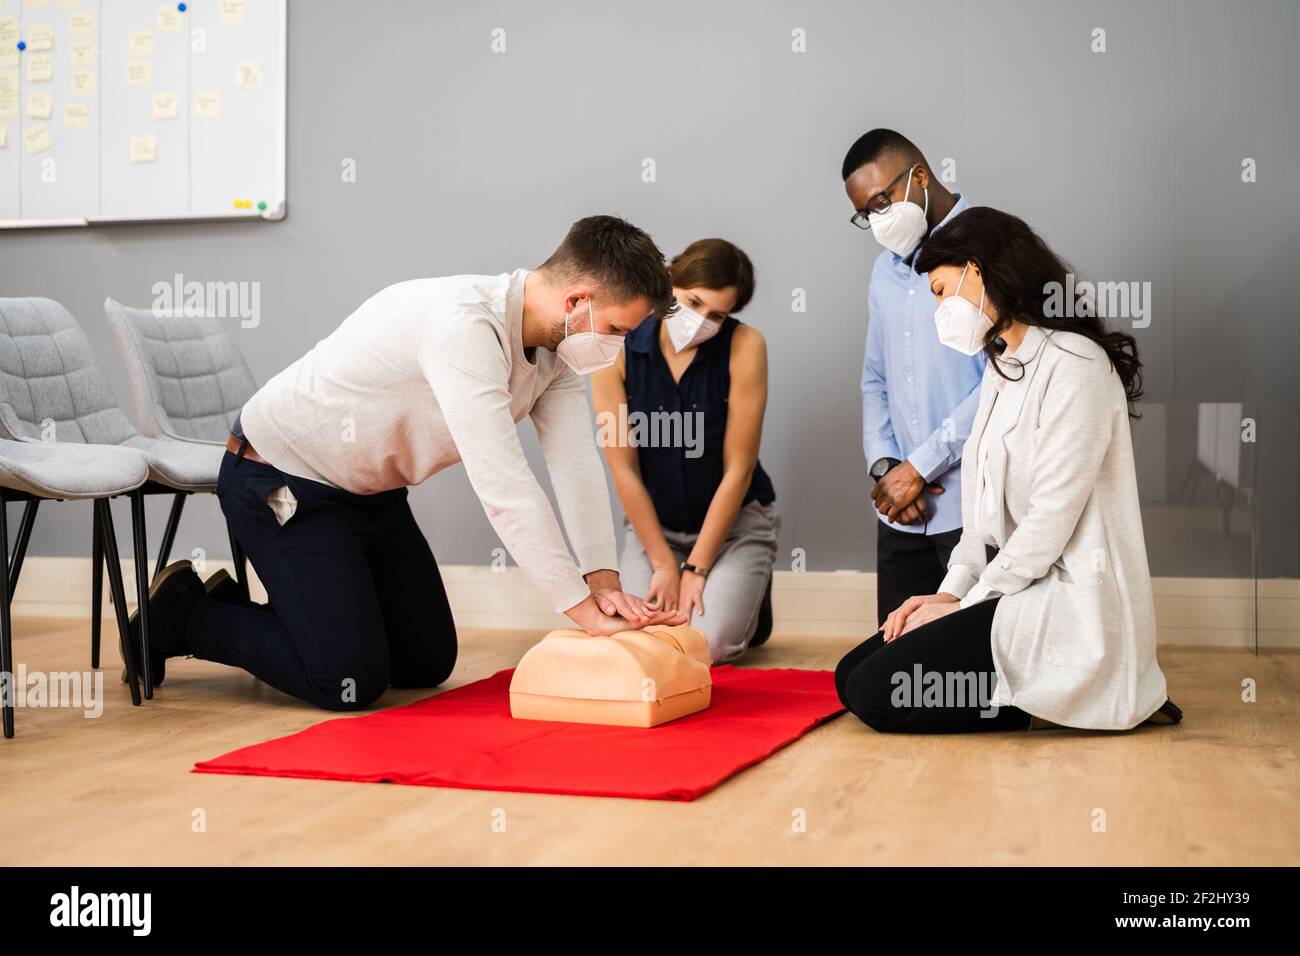 First Aid CPR Resuscitate Training In Face Mask Stock Photo